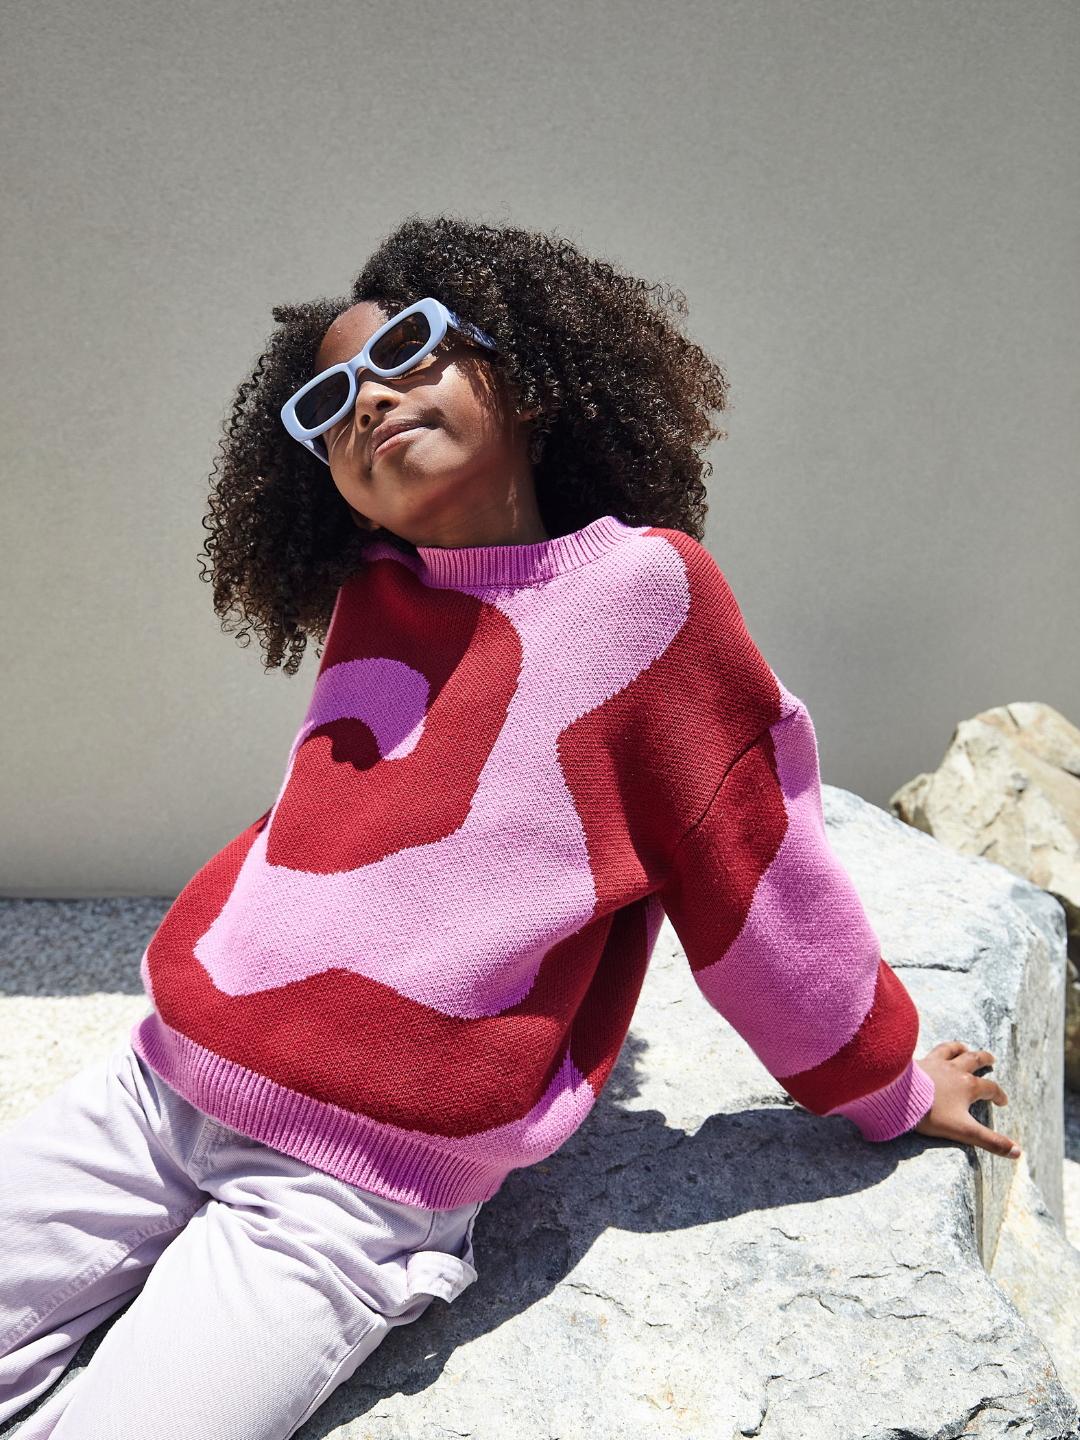 Raspberry | A girl wearing a kids crewneck sweater in bright pink, with a large single red swirl design that covers the entire sweater. She is seated on a rock, with a slight smile, and wears blue rectangular sunglasses.